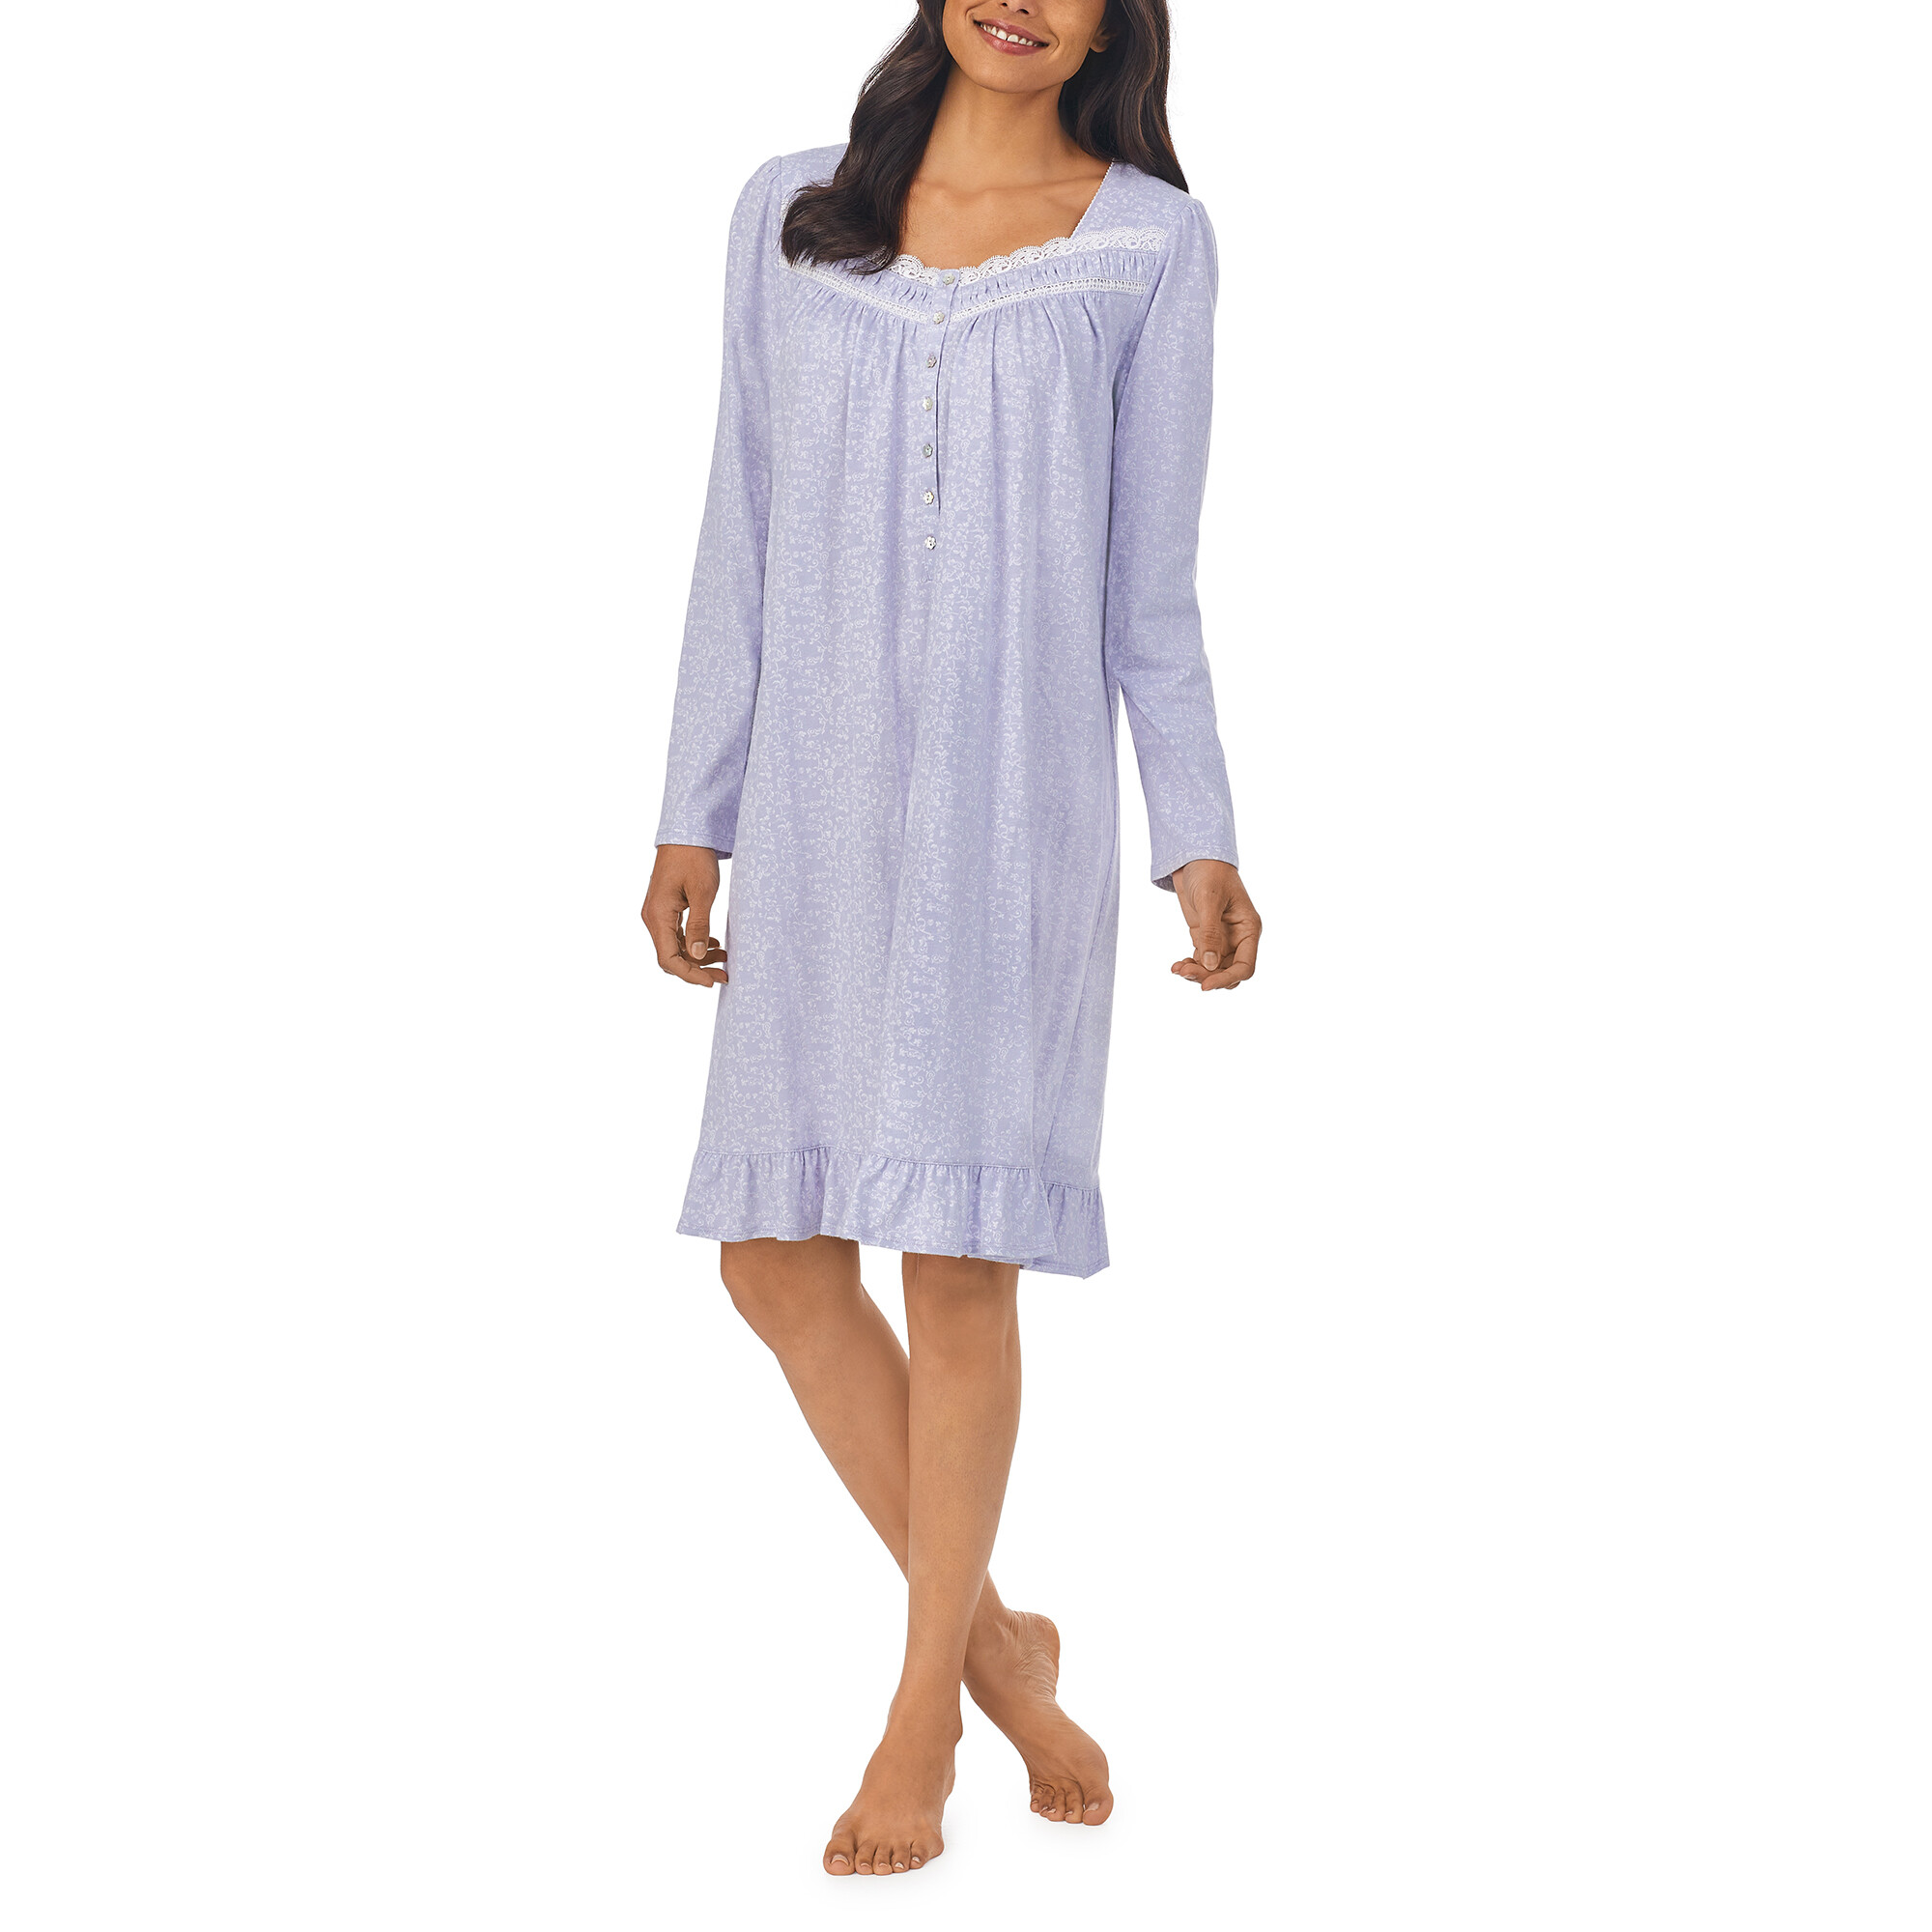 Imbracaminte Femei Eileen West 38quot Short Long Sleeve Nightgown Peri Ground White Scroll image3